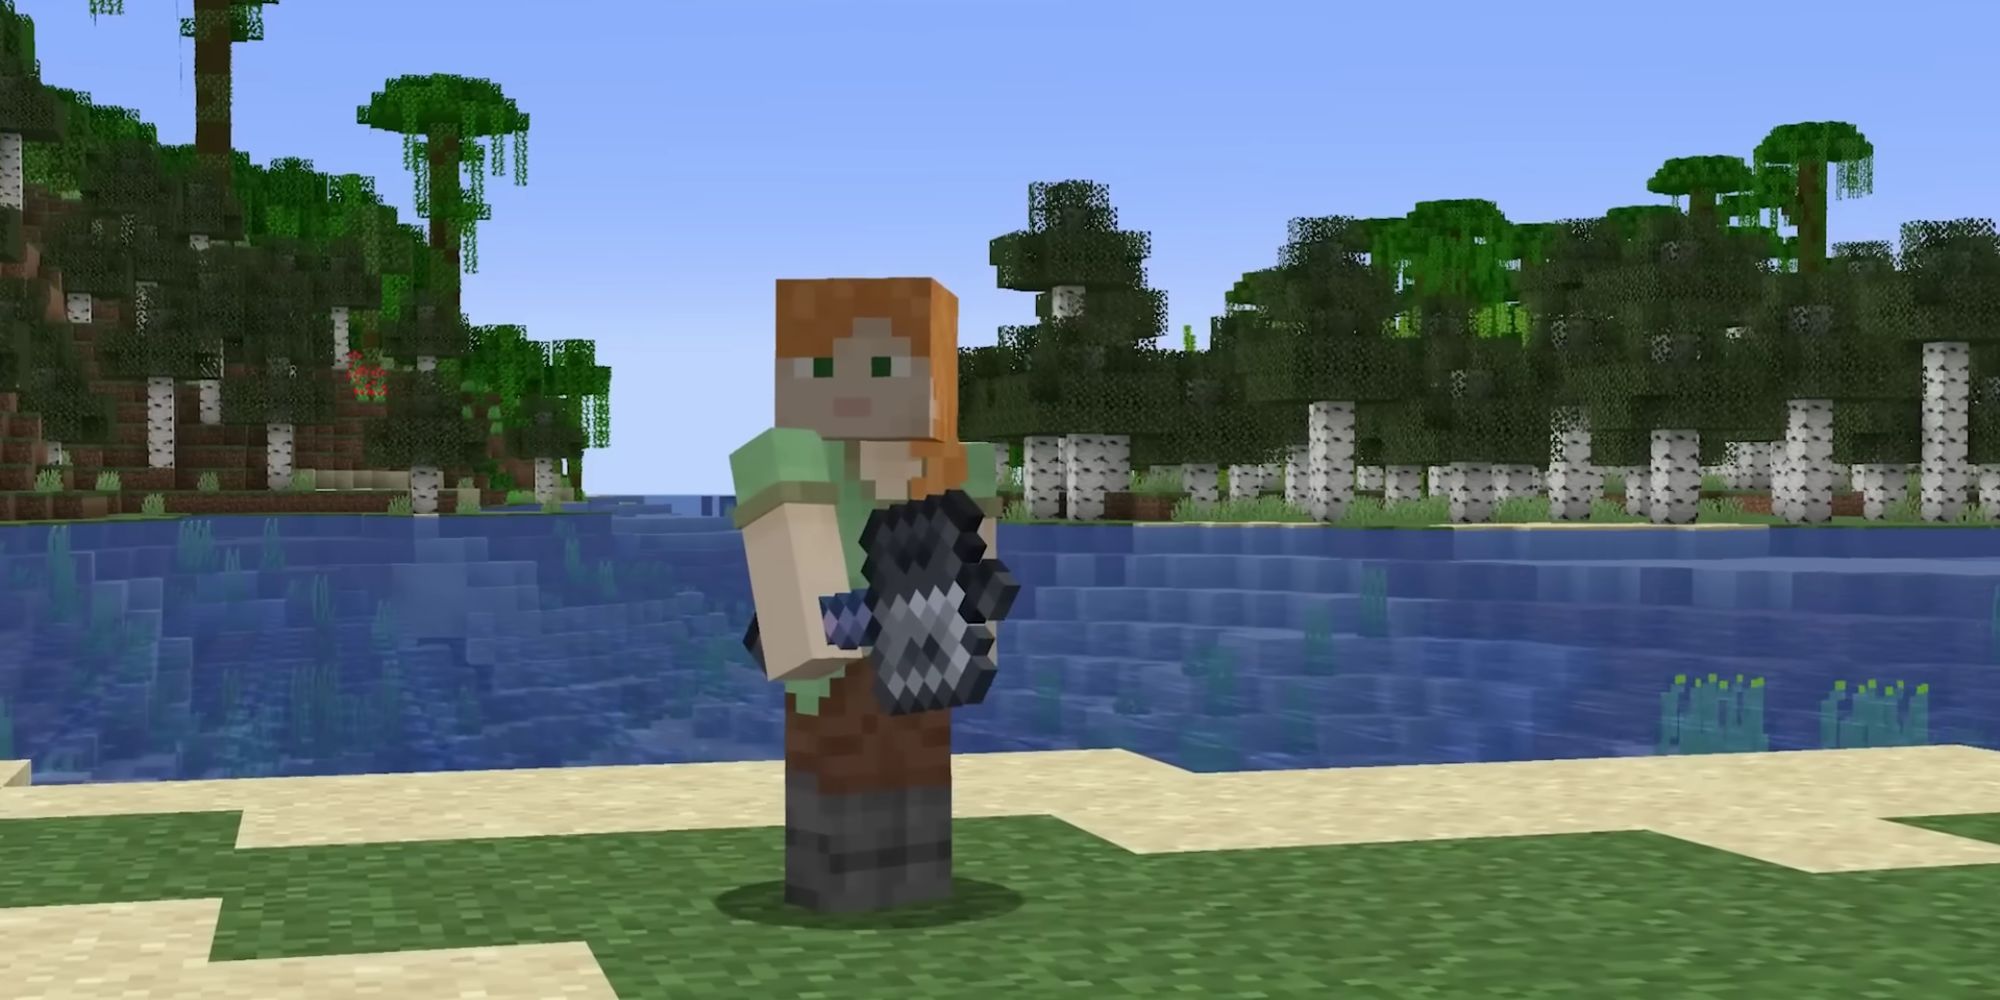 Alex using the new Mace weapon in Minecraft.